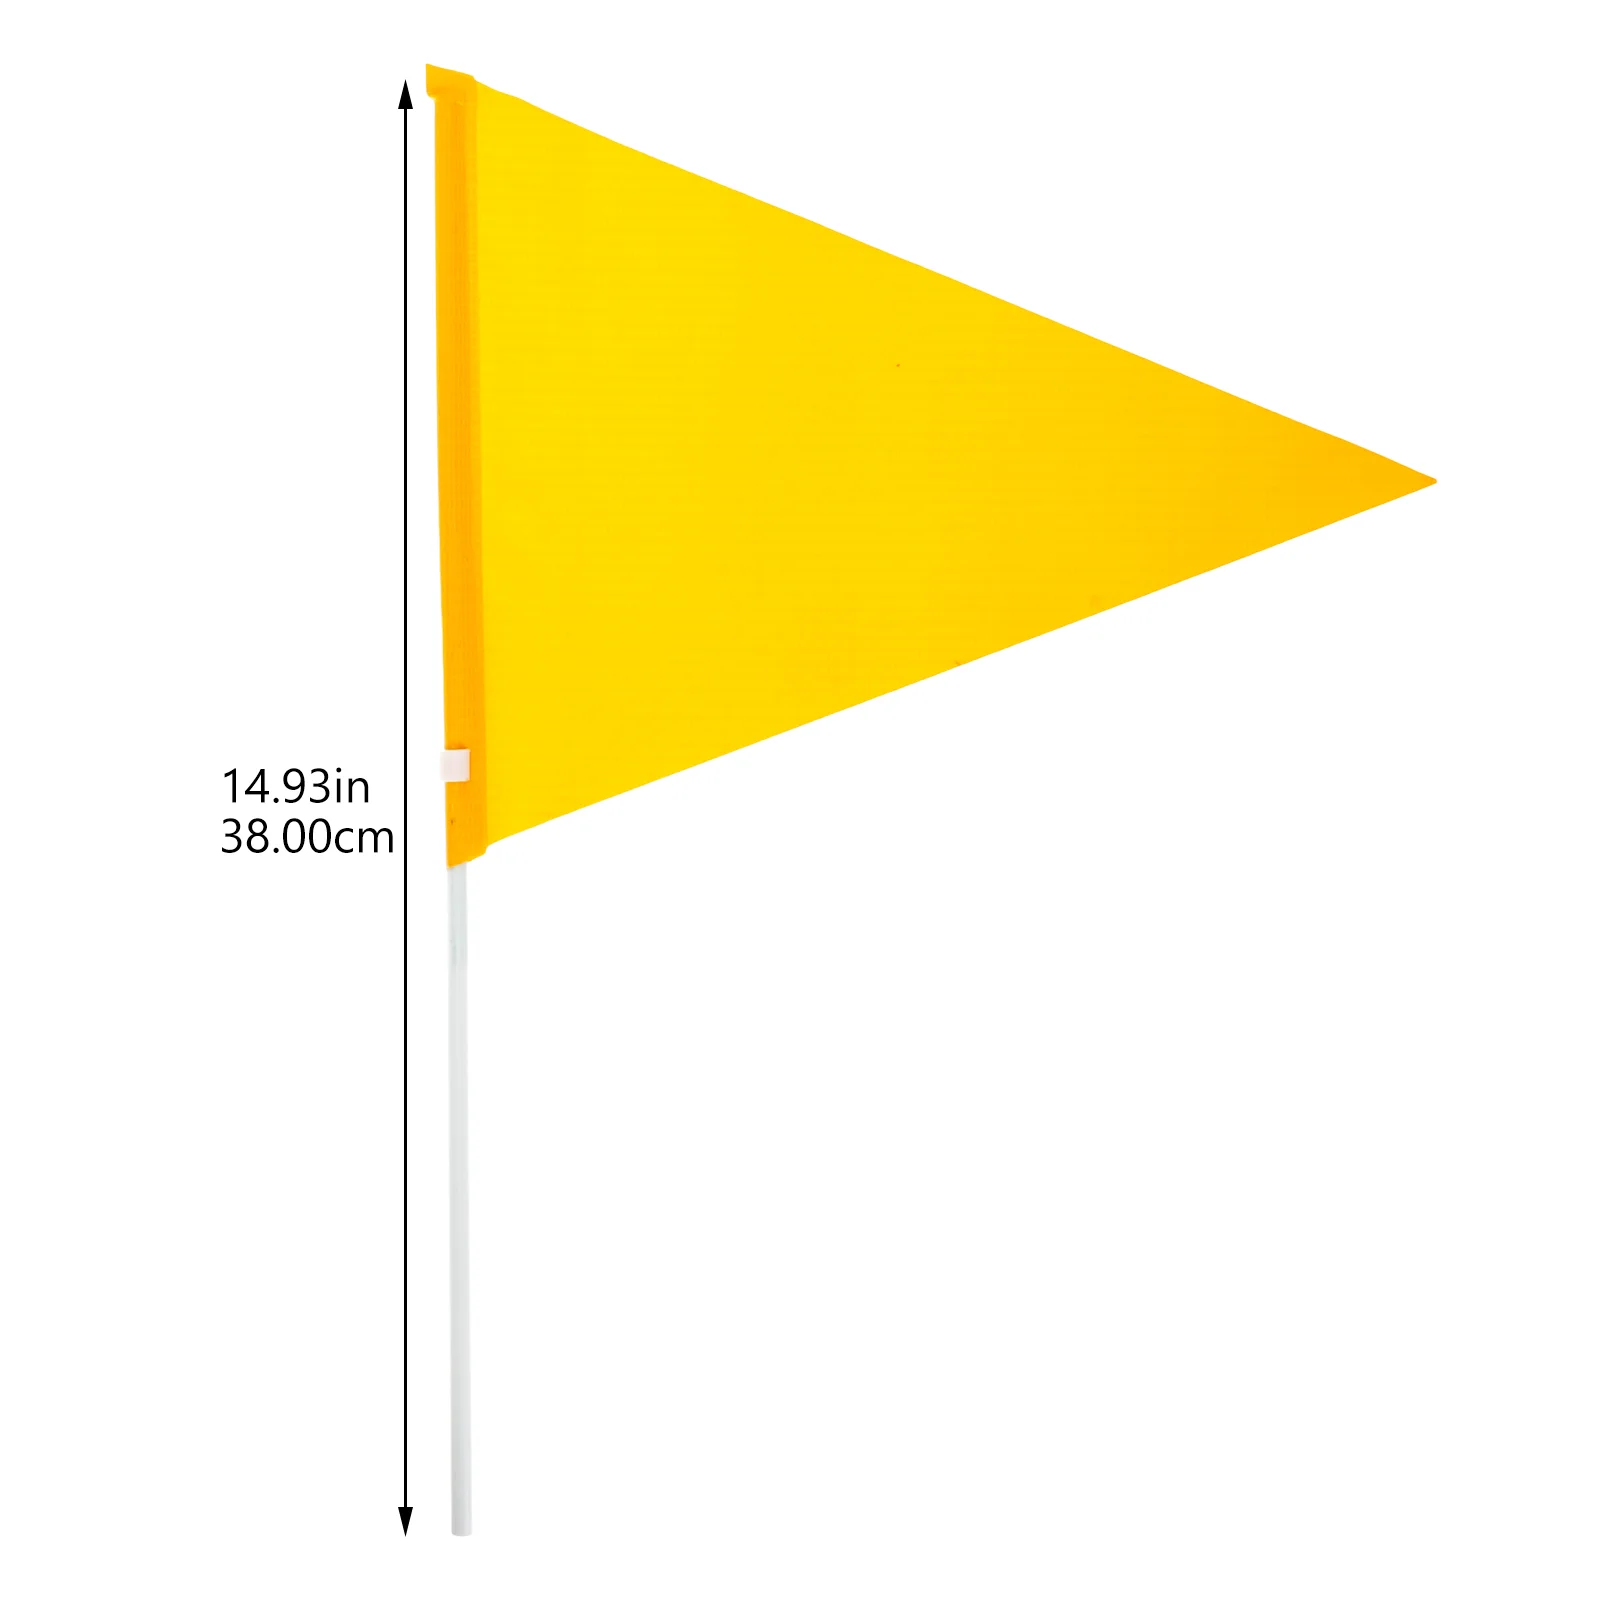 

Flag Bike Safety Cycling Resistant Poleprofessional Wearflags Portable Accessory Handlebar Reflective Trailer Cycle Visibility